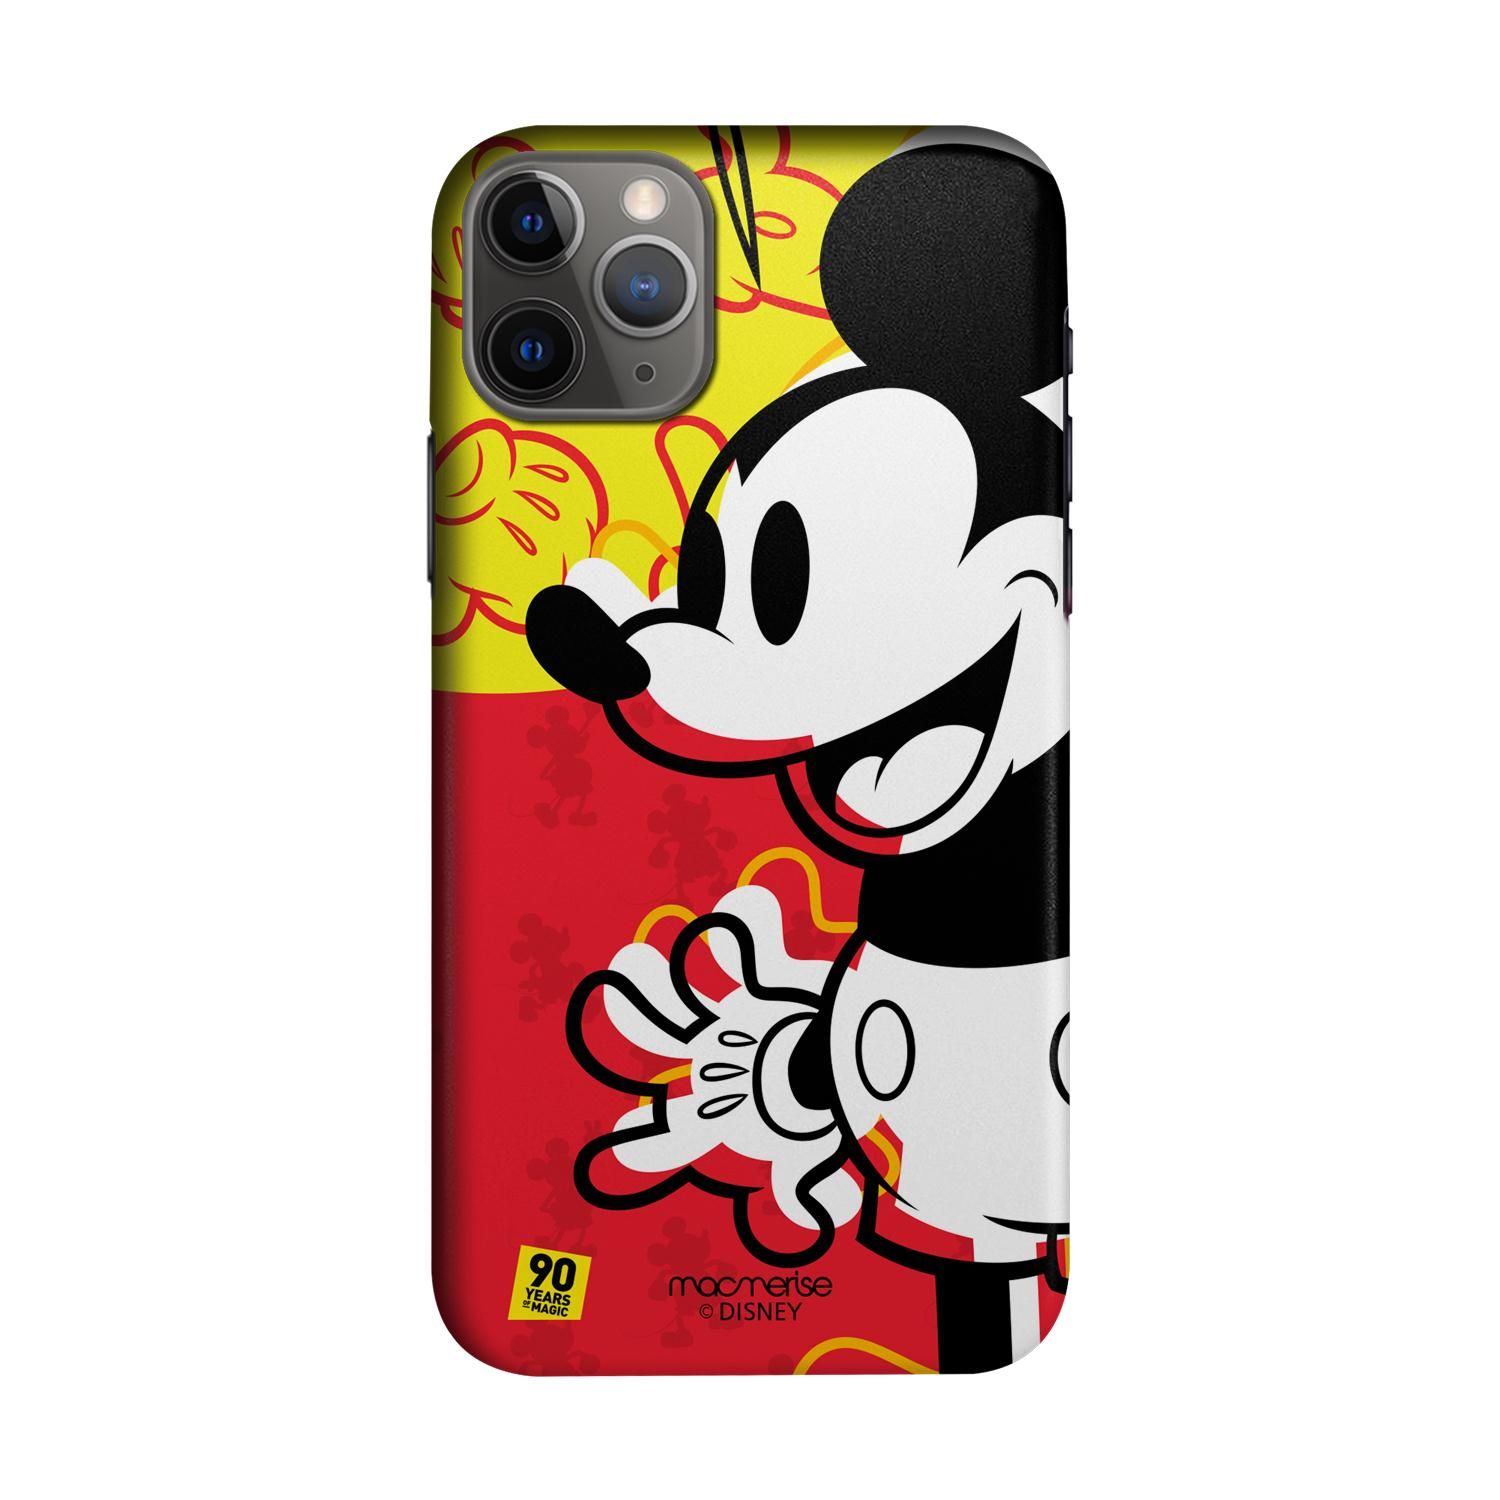 Buy Mickey Red Yellow - Sleek Phone Case for iPhone 11 Pro Max Online